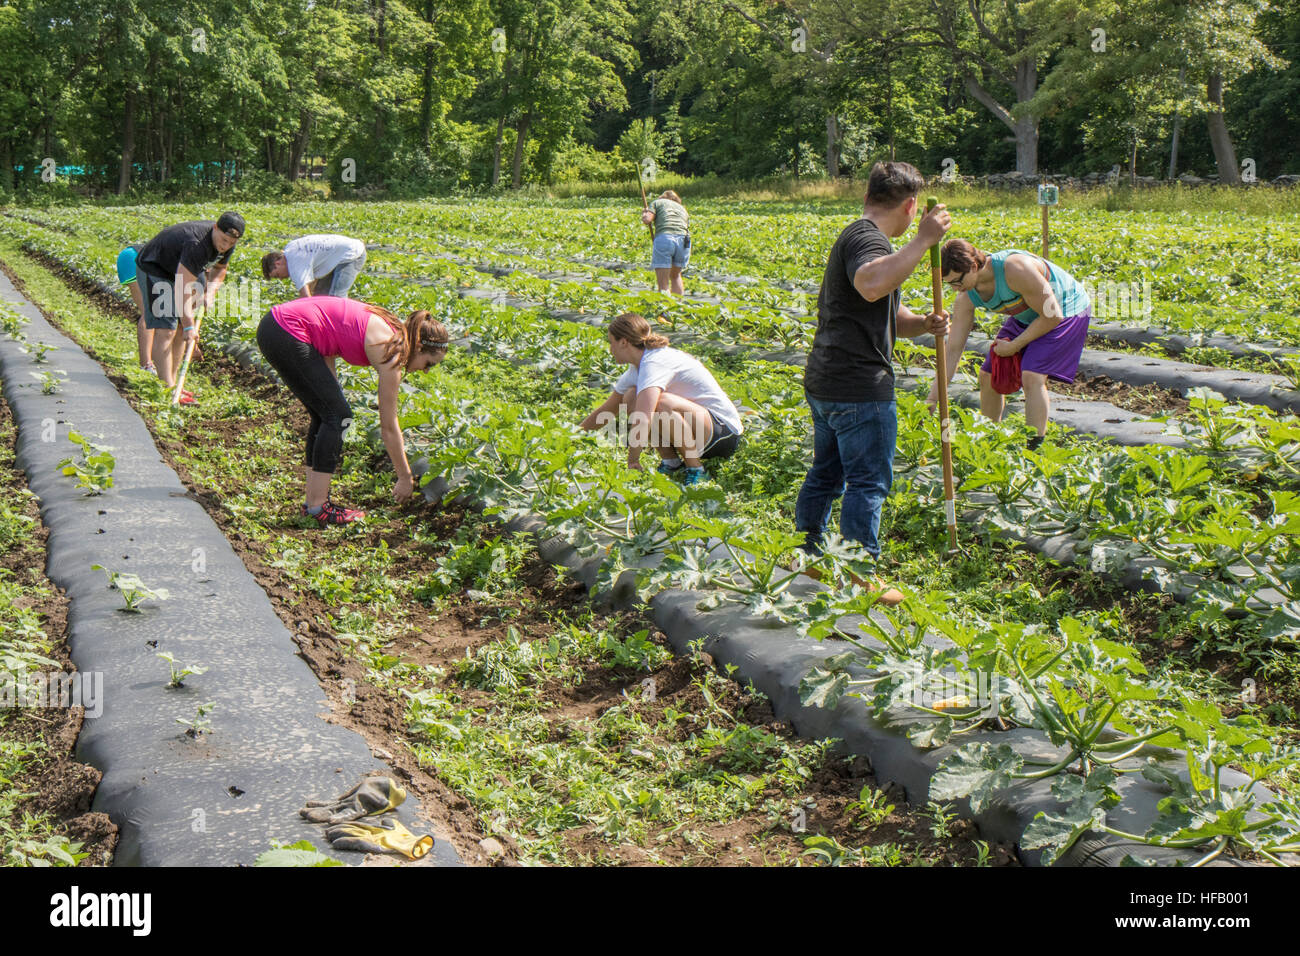 People working on a vegetable farm. Stock Photo